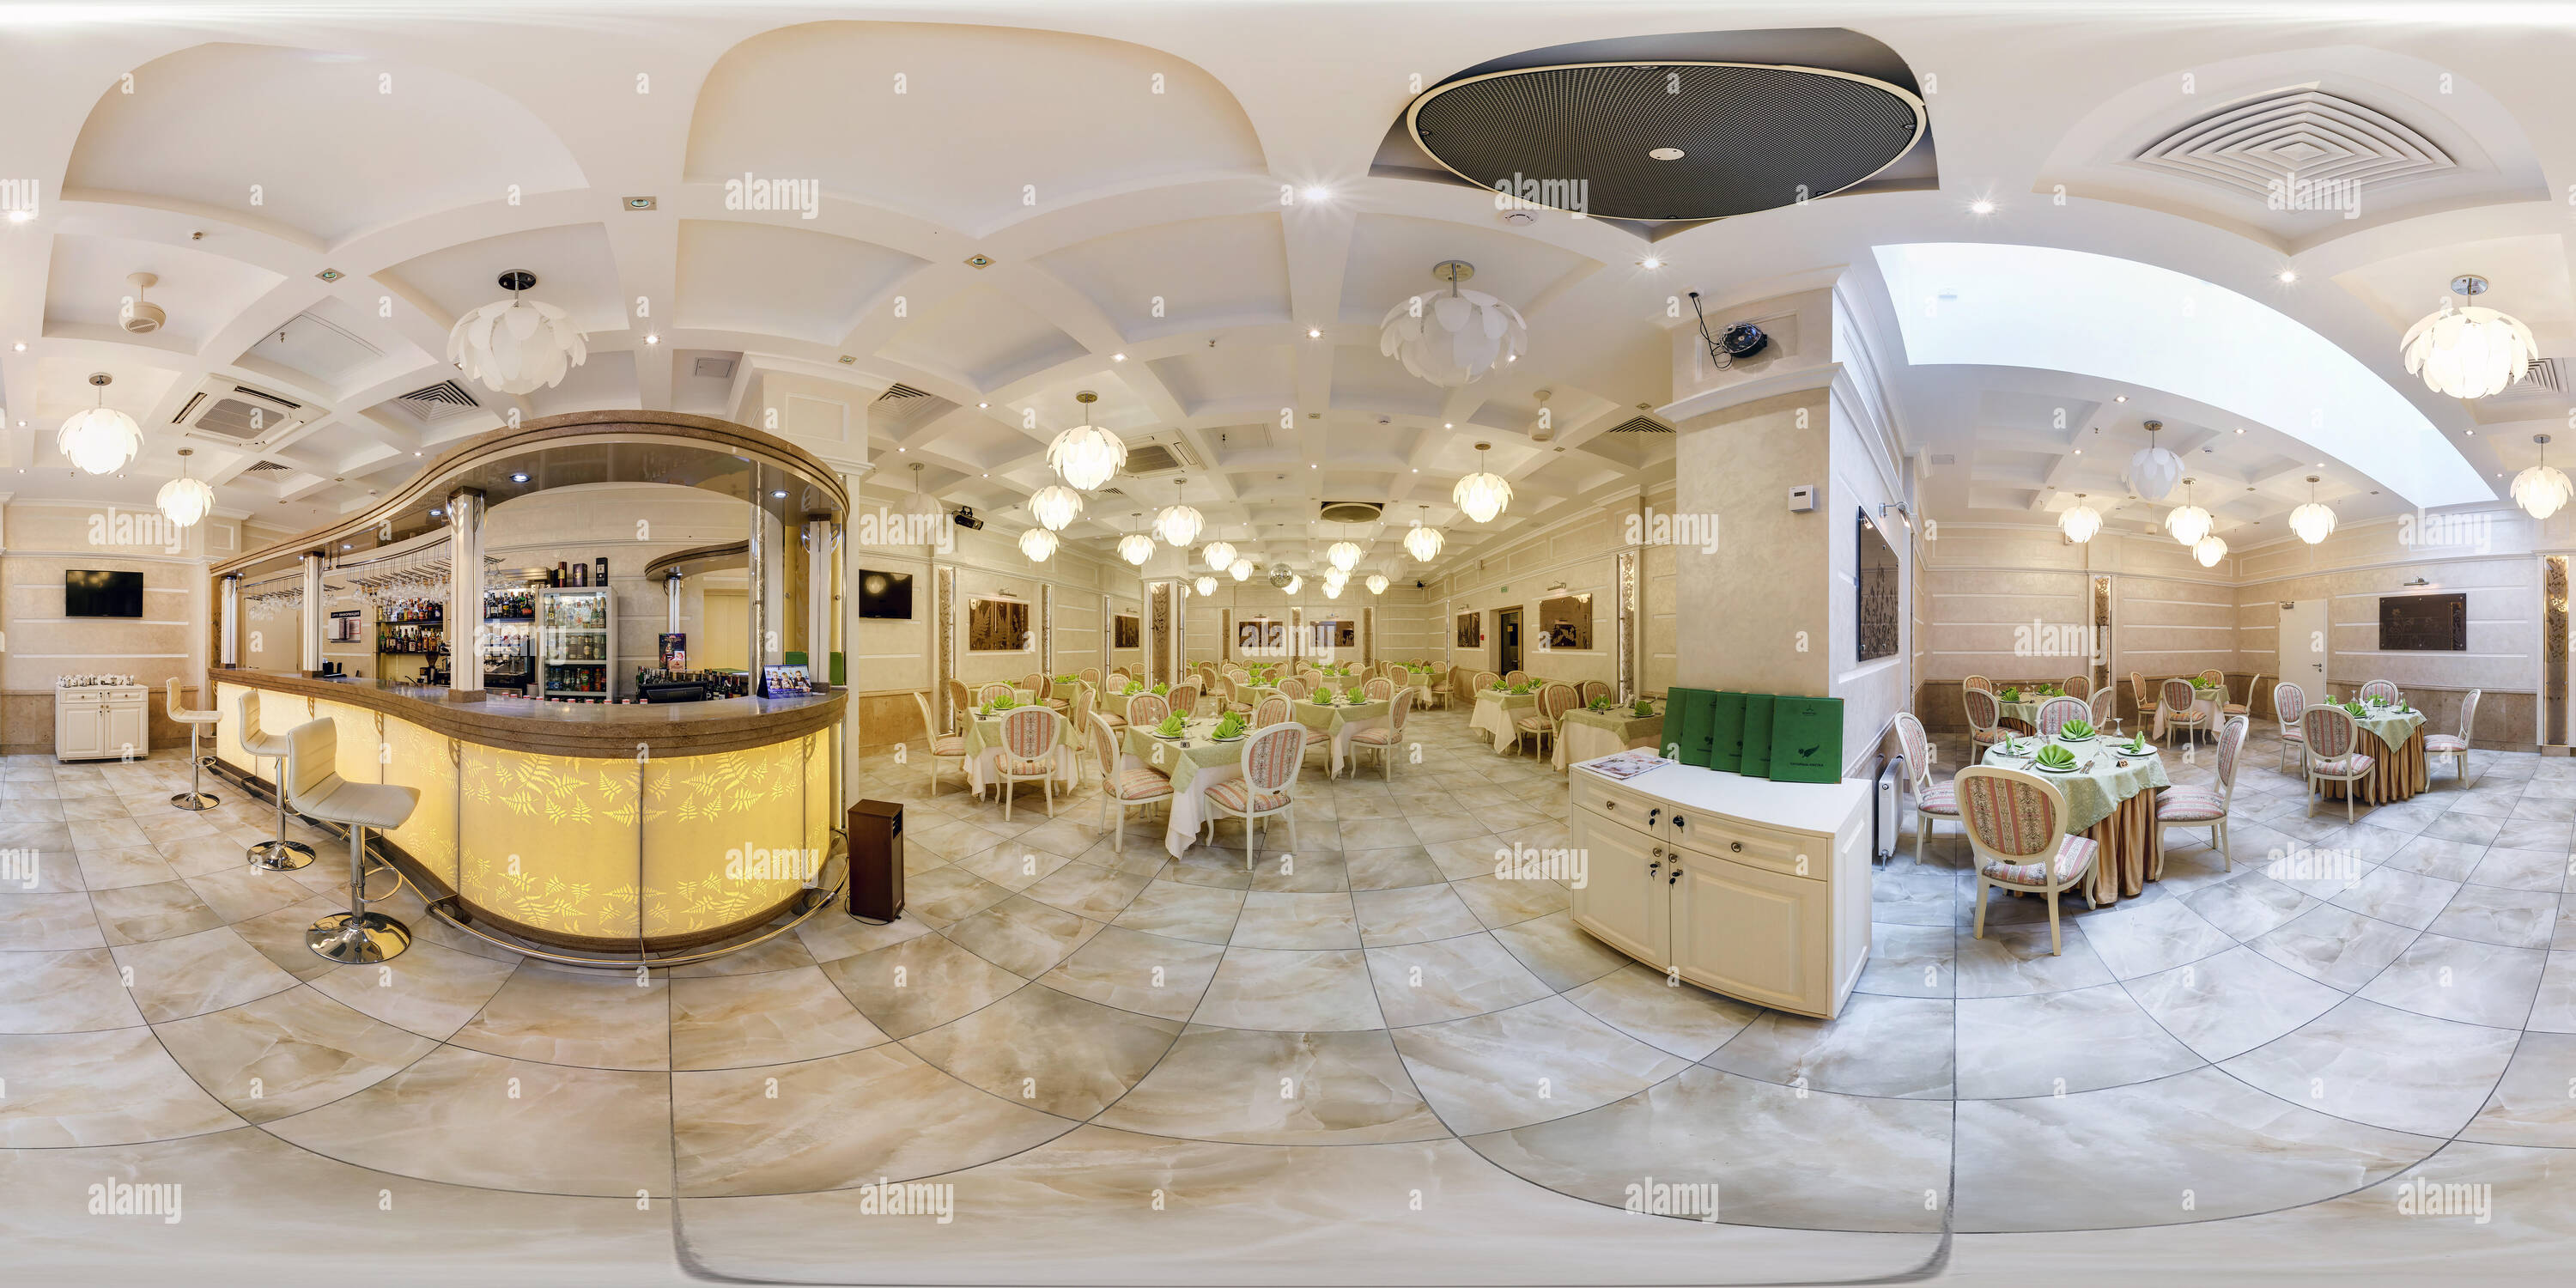 360 degree panoramic view of MINSK, BELARUS - APRIL 7, 2013: Full 360 degree panorama in equirectangular spherical projection of stylish cafe in white color